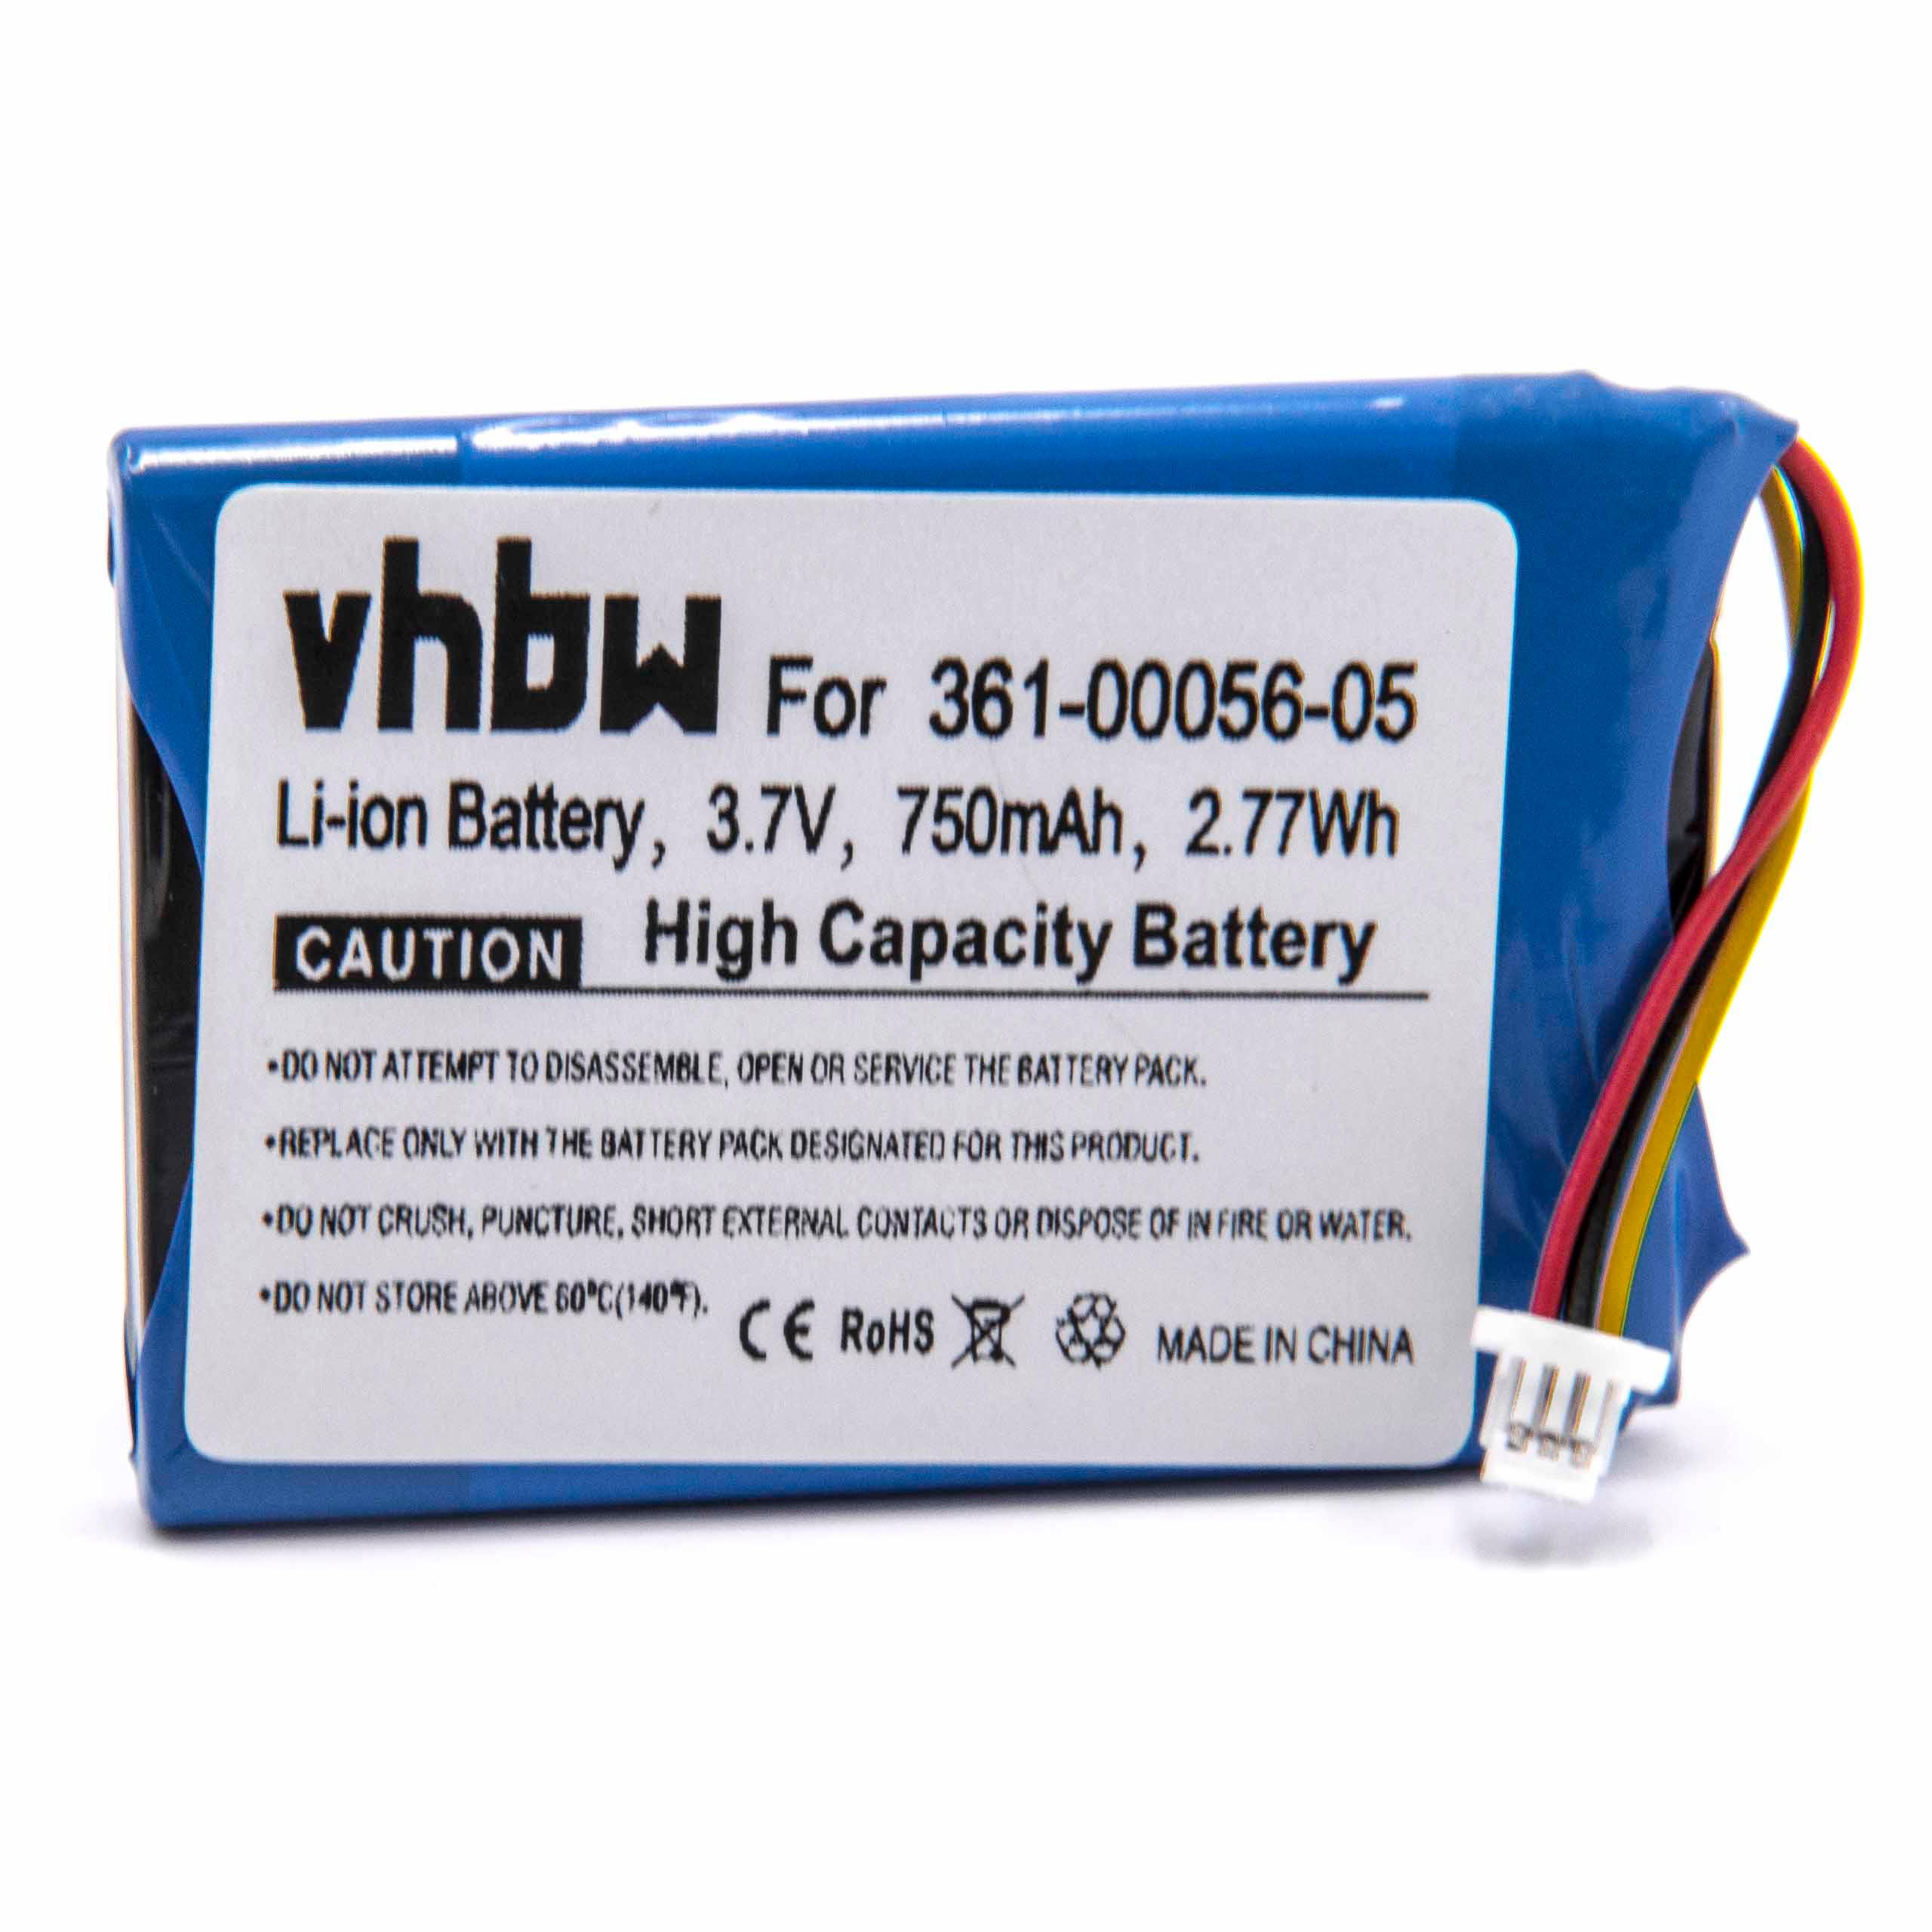 GPS Battery Replacement for Garmin 361-00056-11, 361-00056-05 - 750mAh, 3.7V